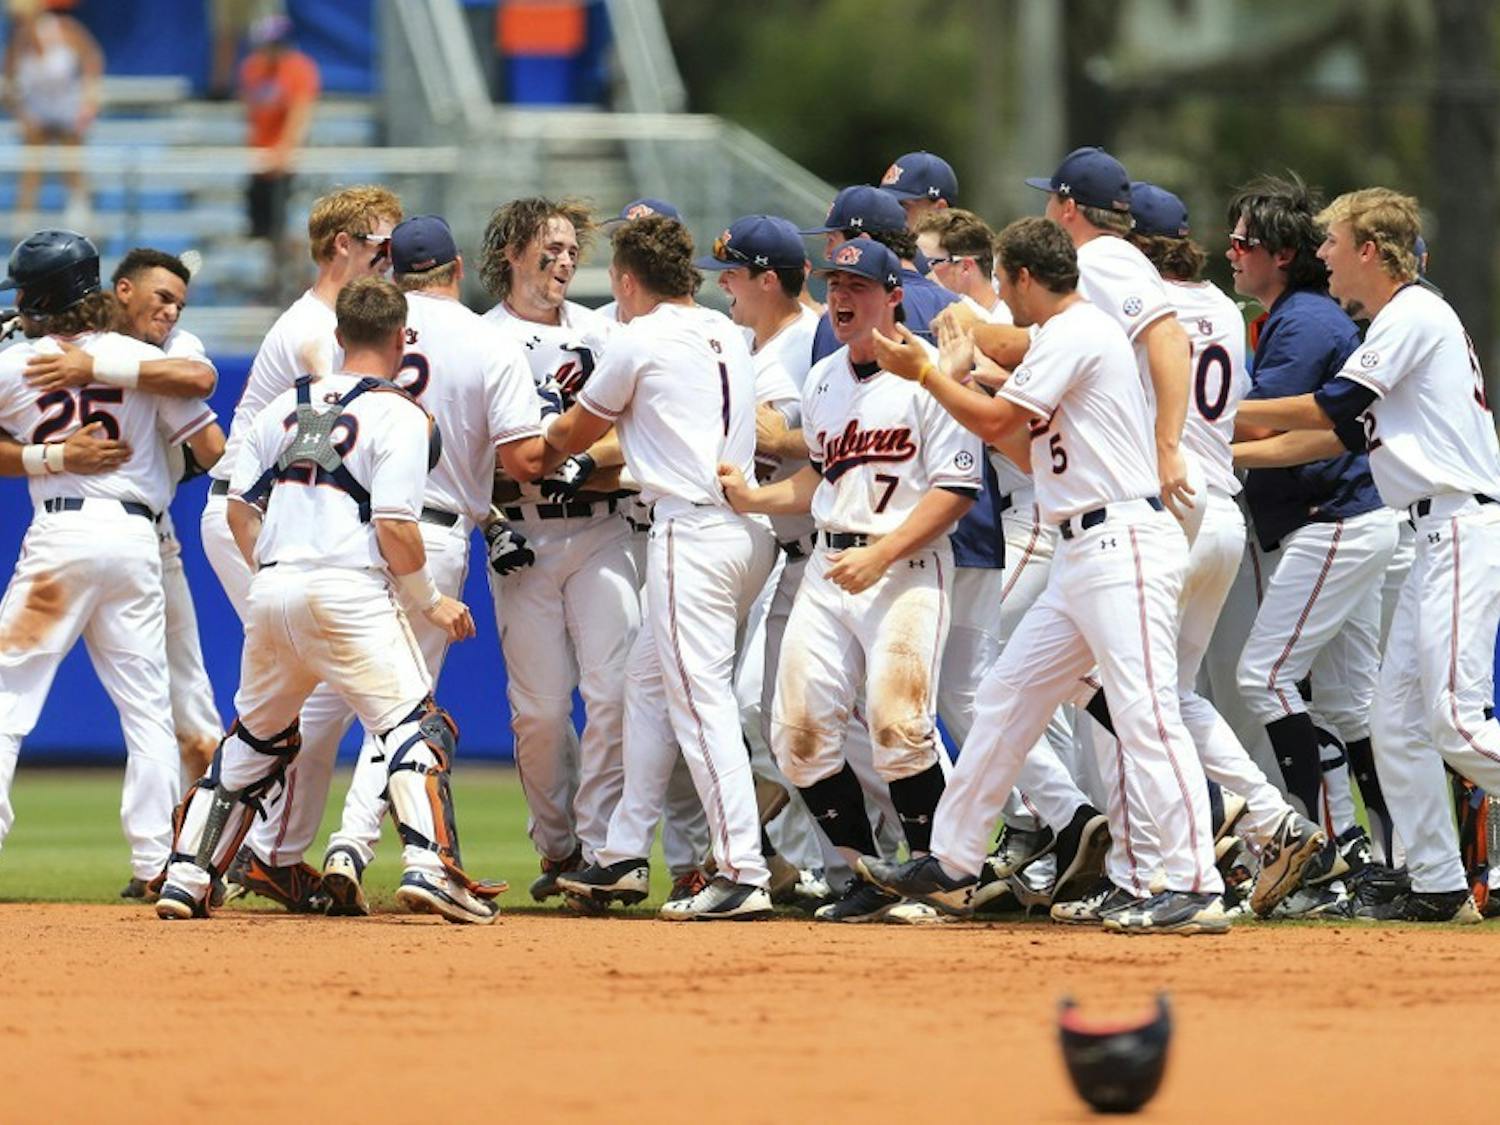 Auburn celebrates after a walk-off single by Luke Jarvis against Florida during the ninth inning of an NCAA Super Regional college baseball game Sunday, June 10, 2018, in Gainesville, Fla. (AP Photo/Matt Stamey)